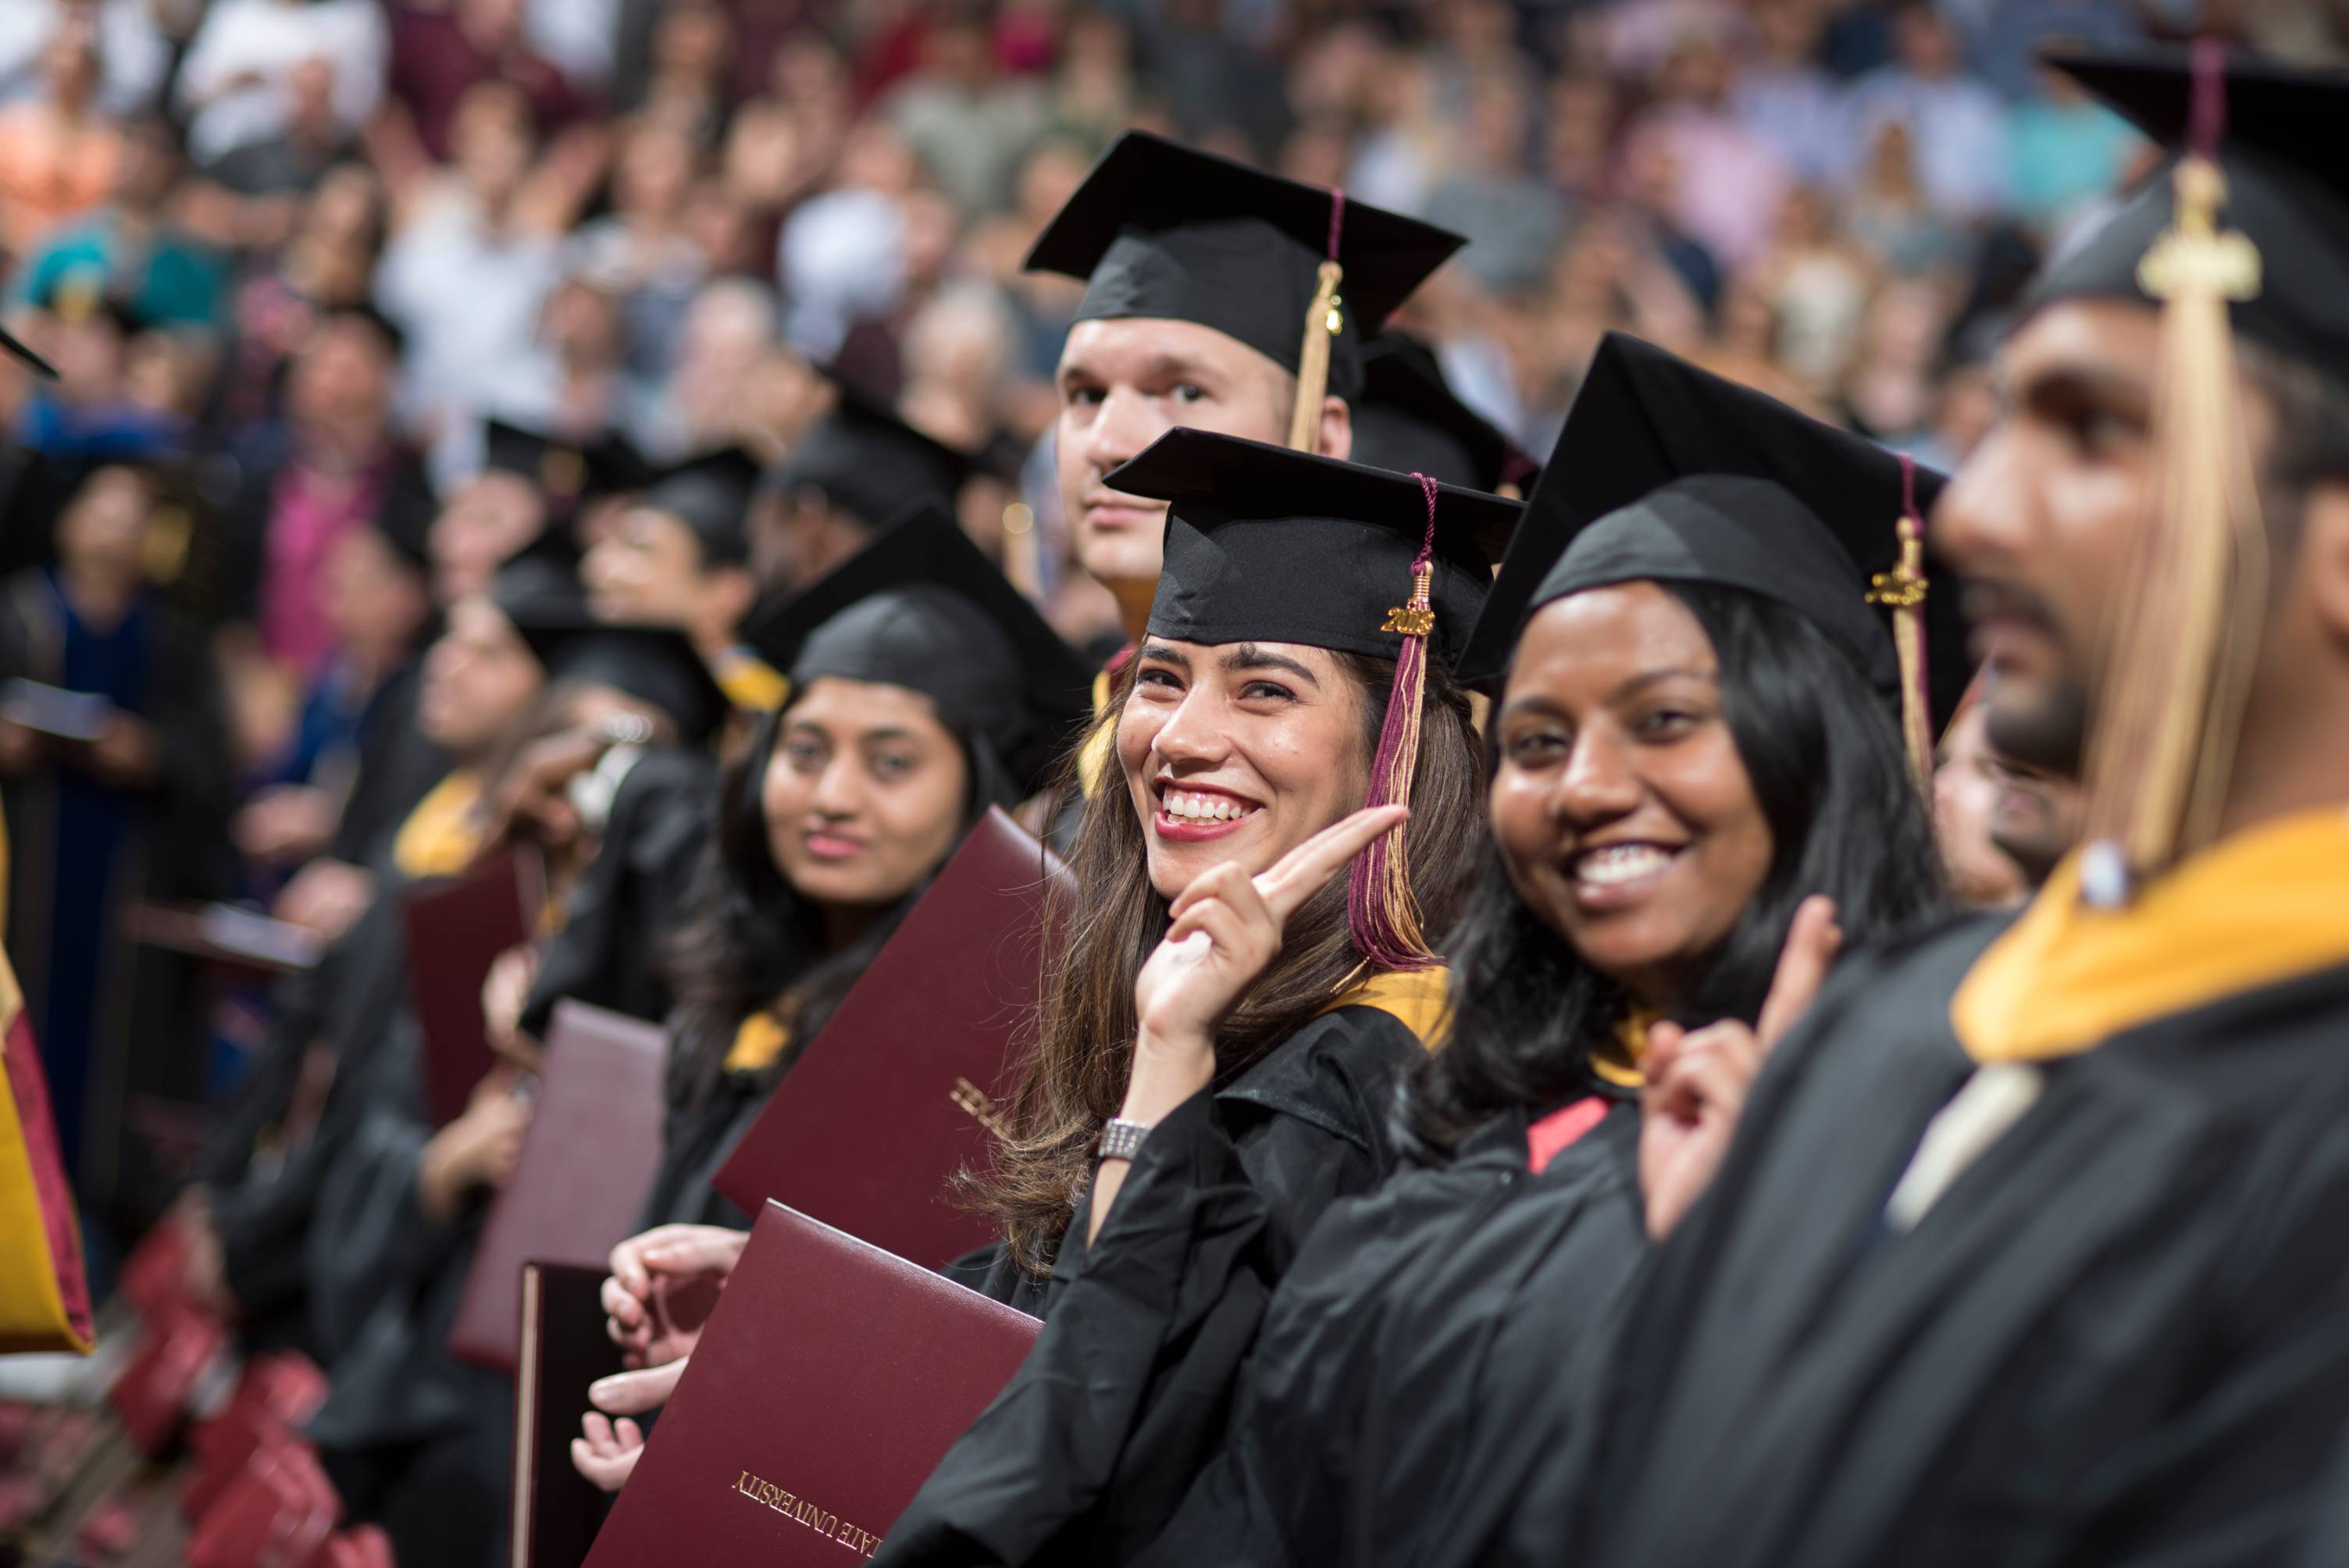 students at txst graduation waving their hands in celebration